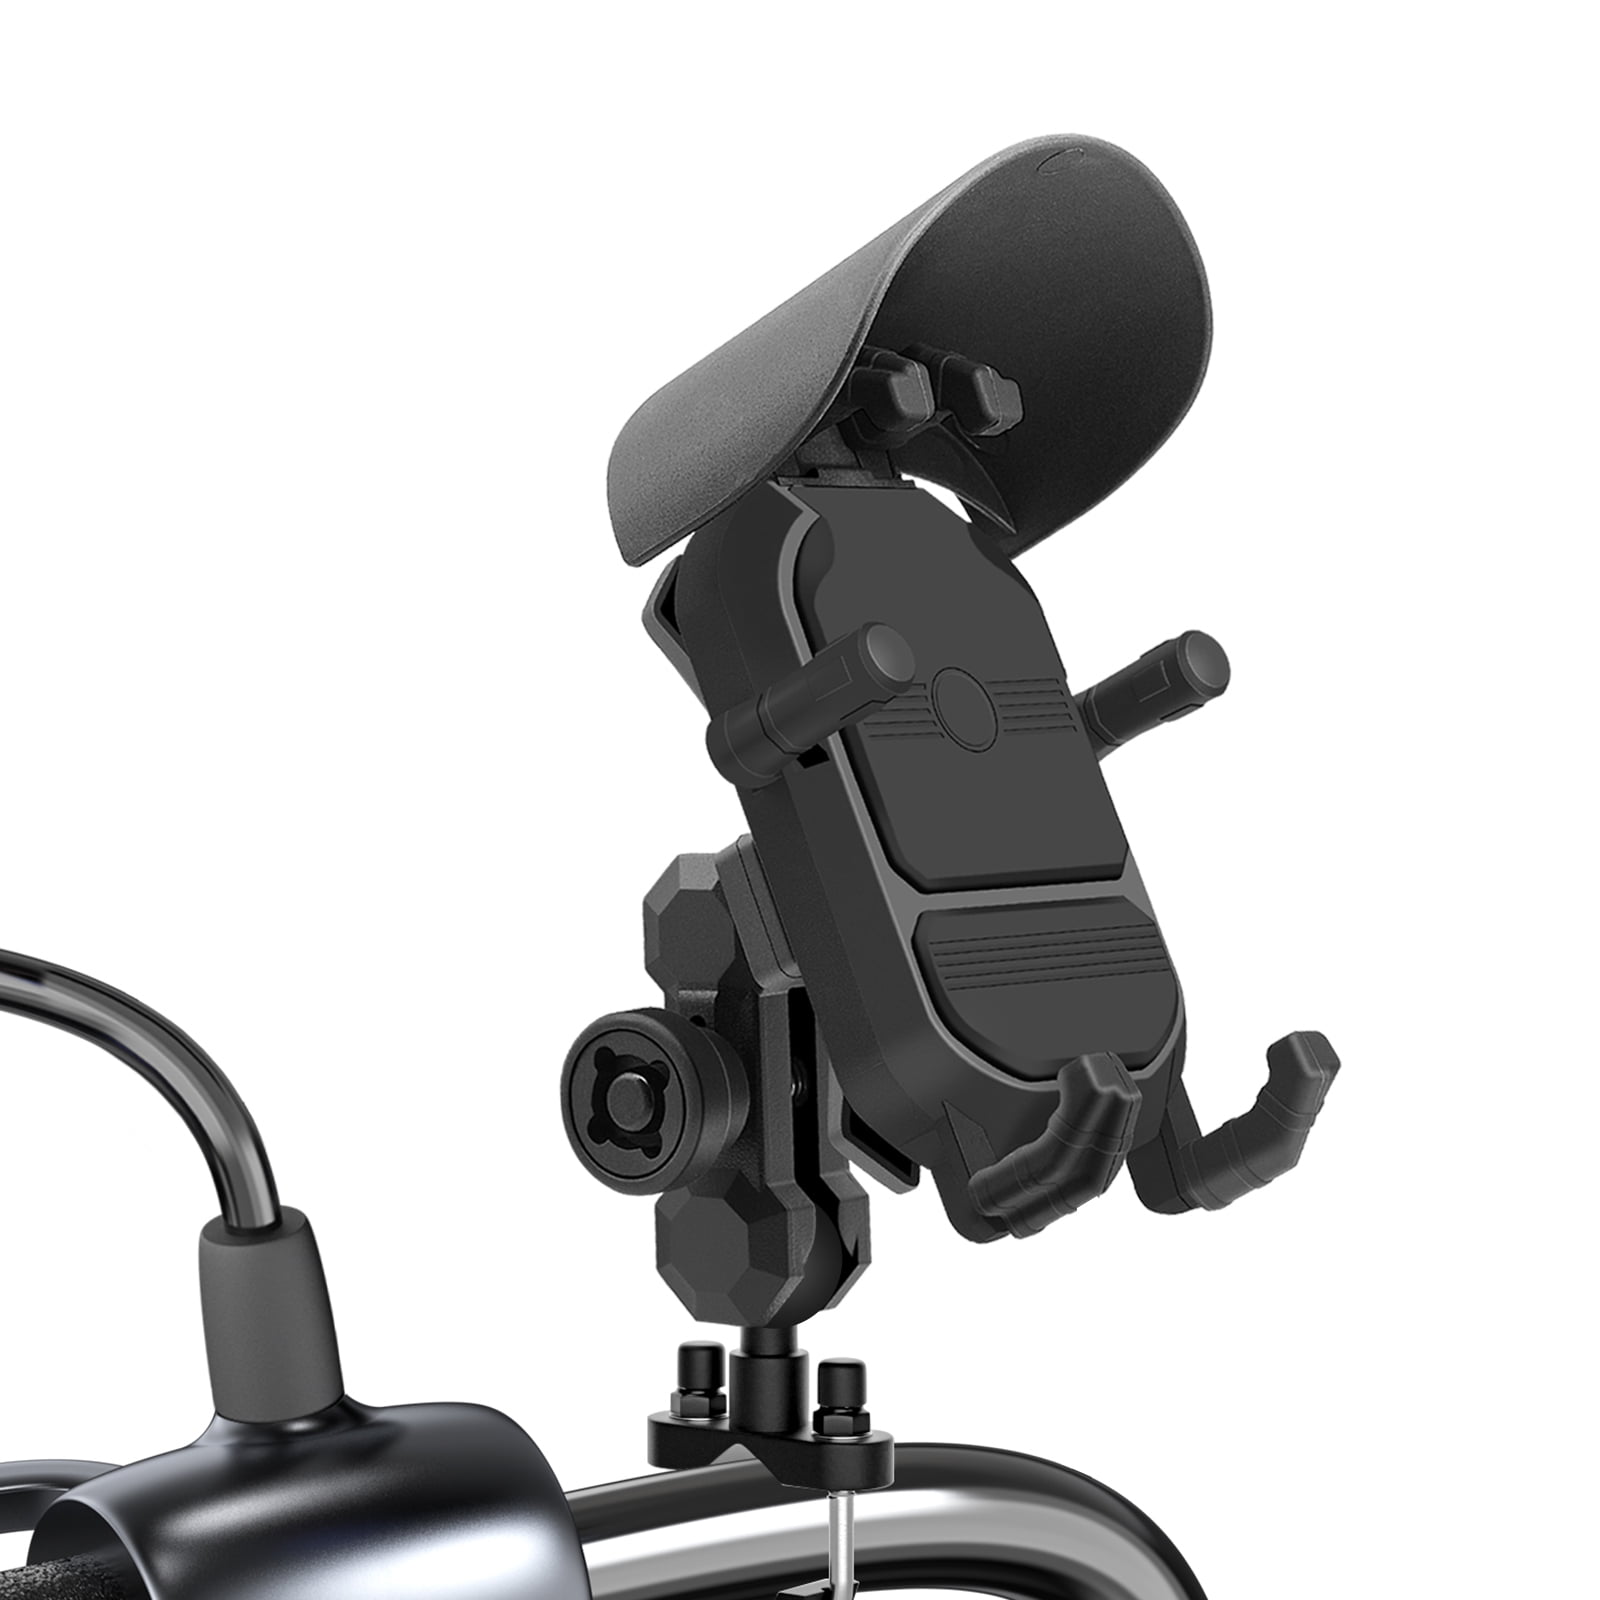 Motorcycle Phone Holder Motorbike Cellphone Bracket Stand Mount Moto  Telephone Support with USB and Wireless Charger Waterproof